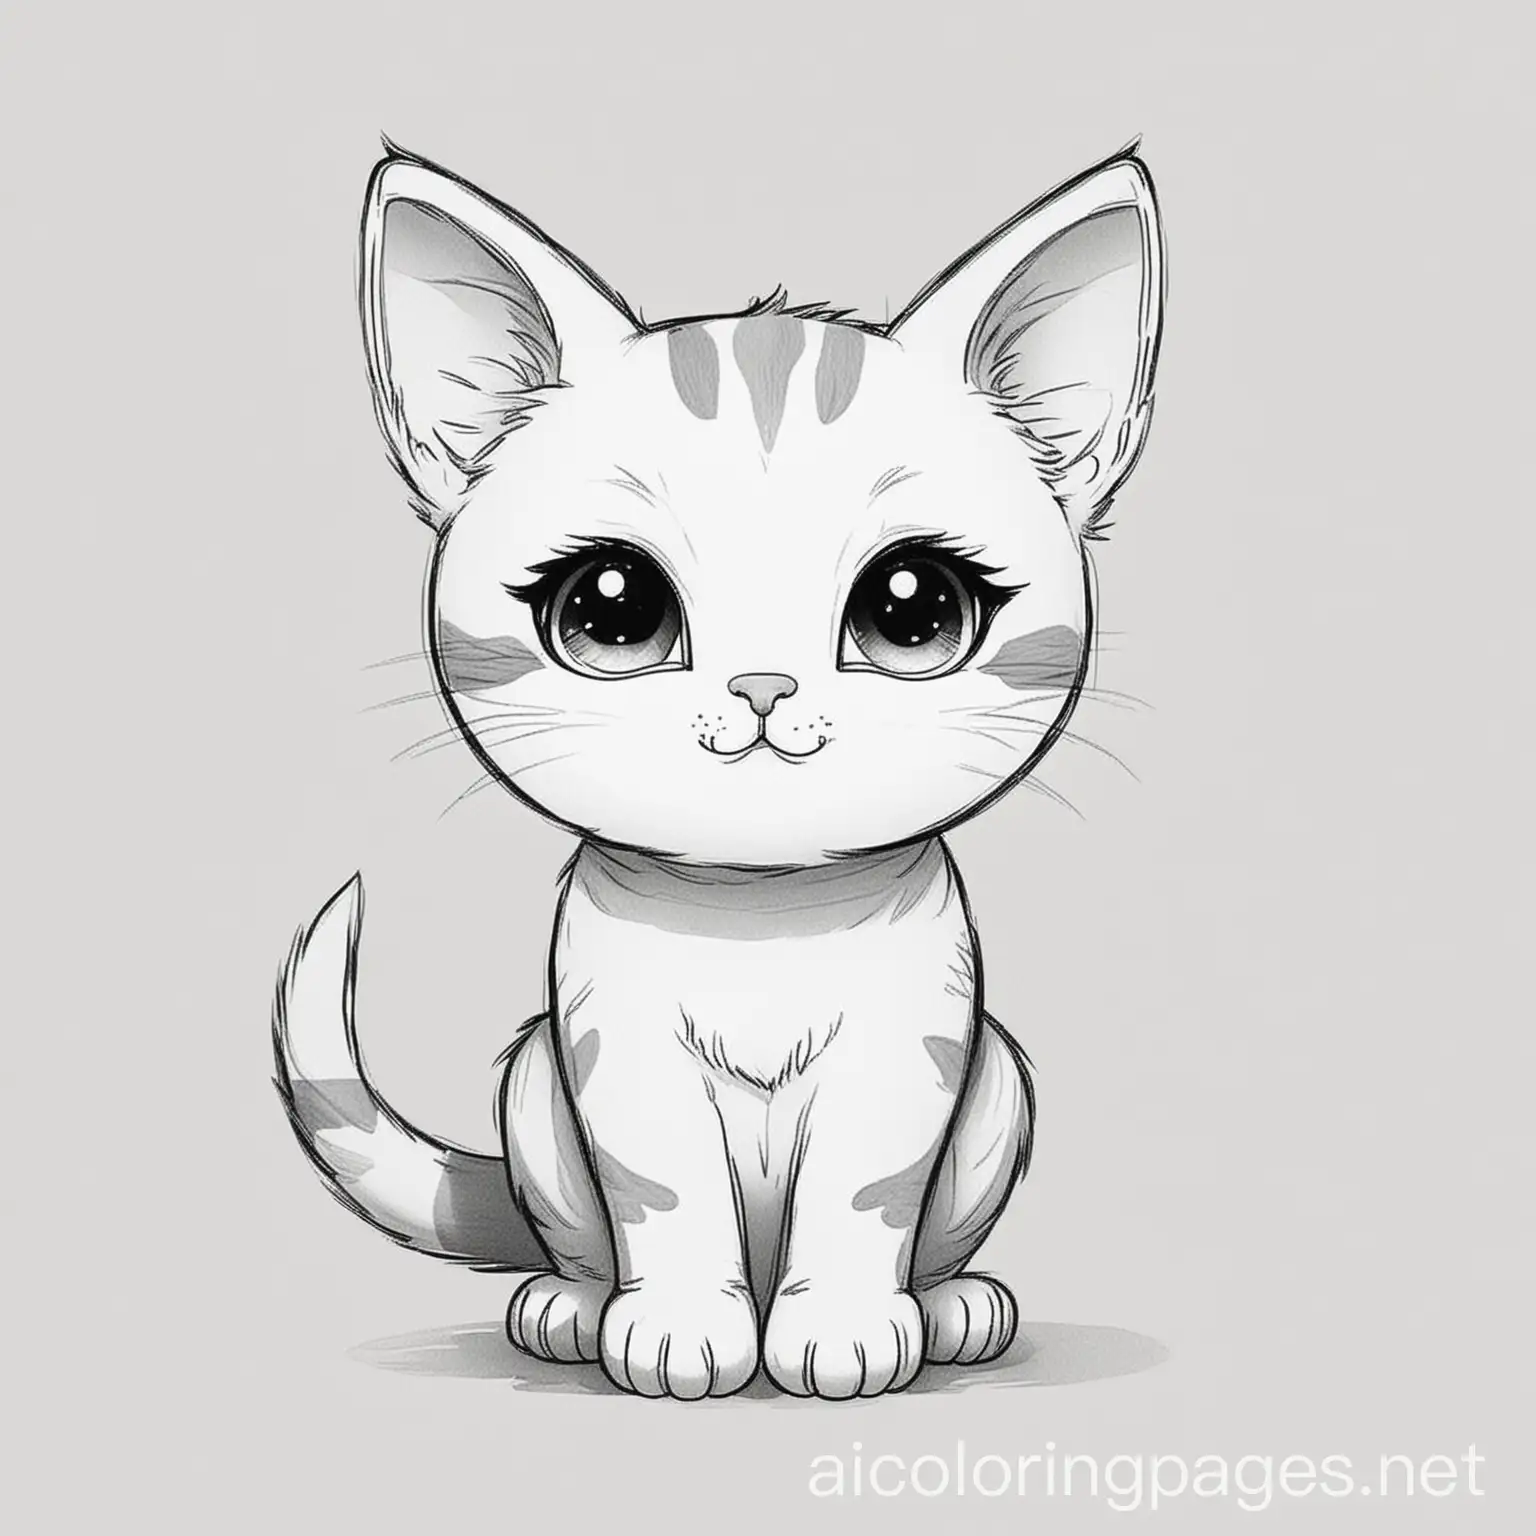 a cute cat, Coloring Page, black and white, line art, white background, Simplicity, Ample White Space. The background of the coloring page is plain white to make it easy for young children to color within the lines. The outlines of all the subjects are easy to distinguish, making it simple for kids to color without too much difficulty